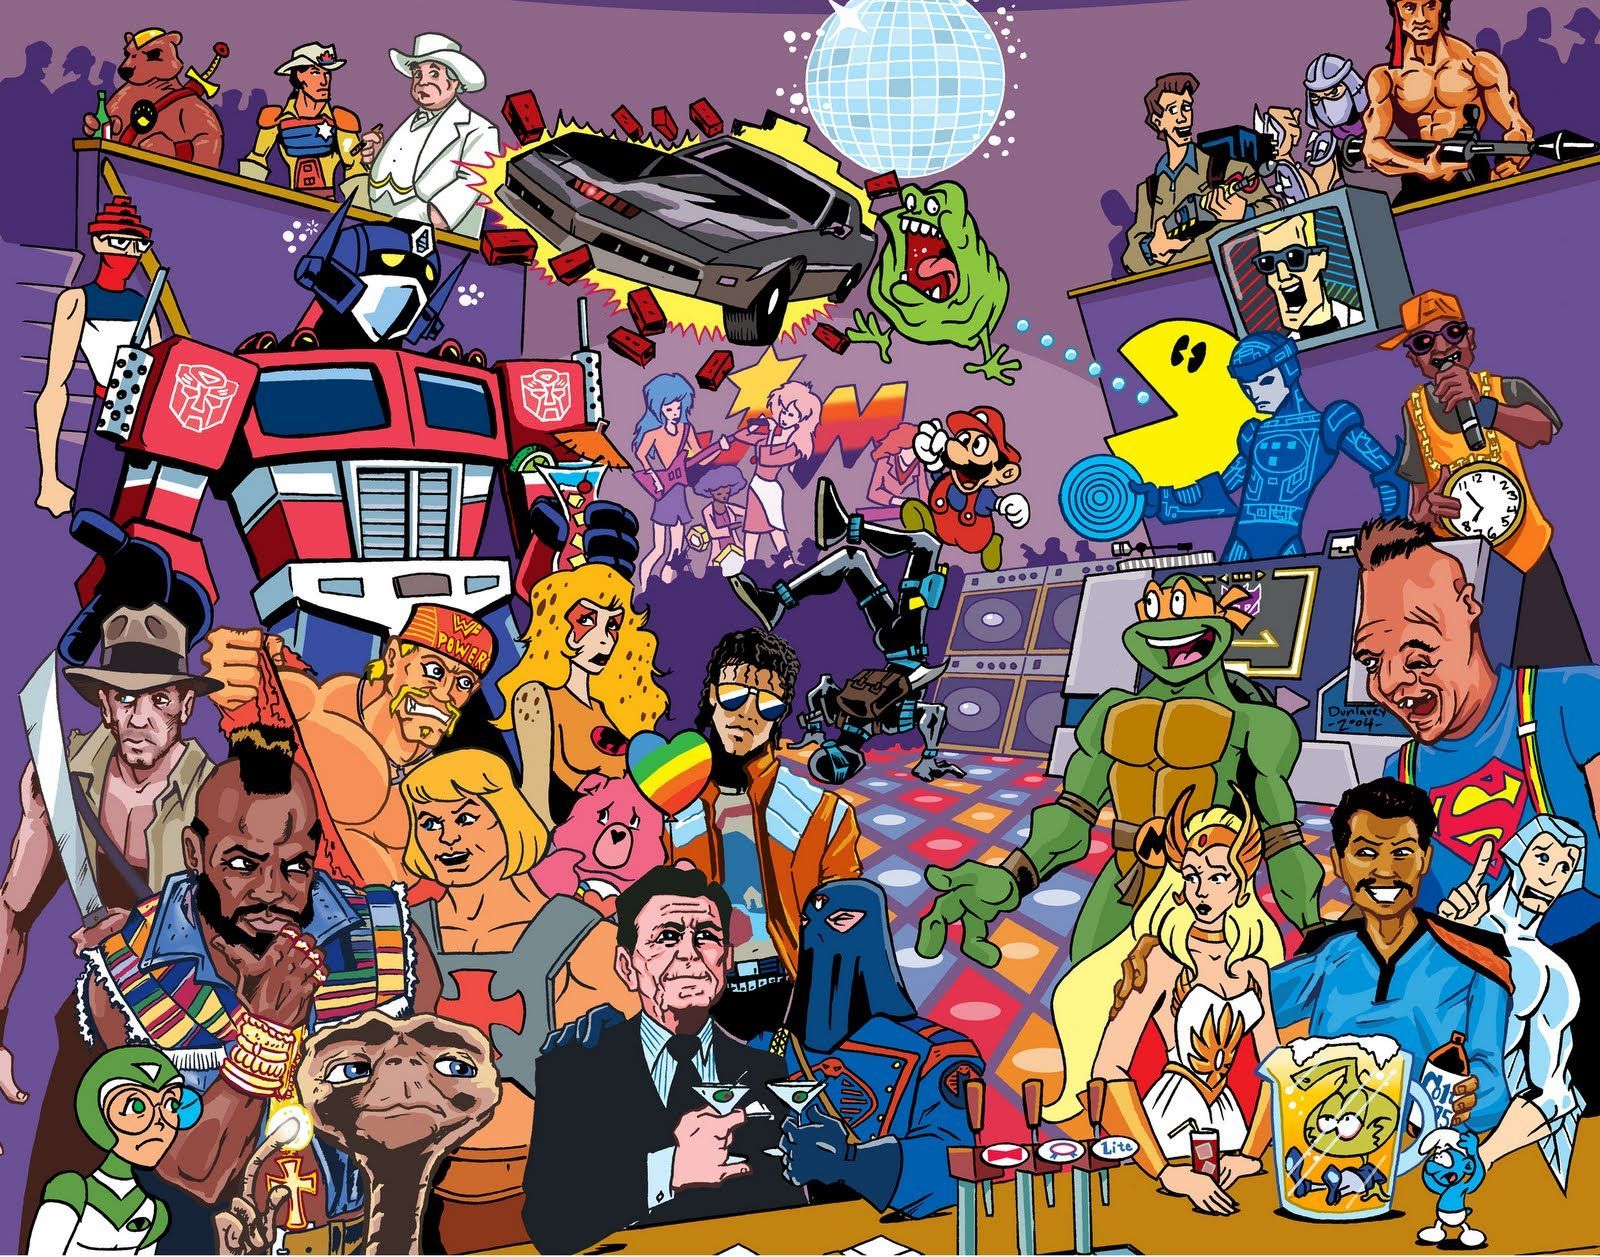 80s Collage Wallpaper Free 80s Collage Background